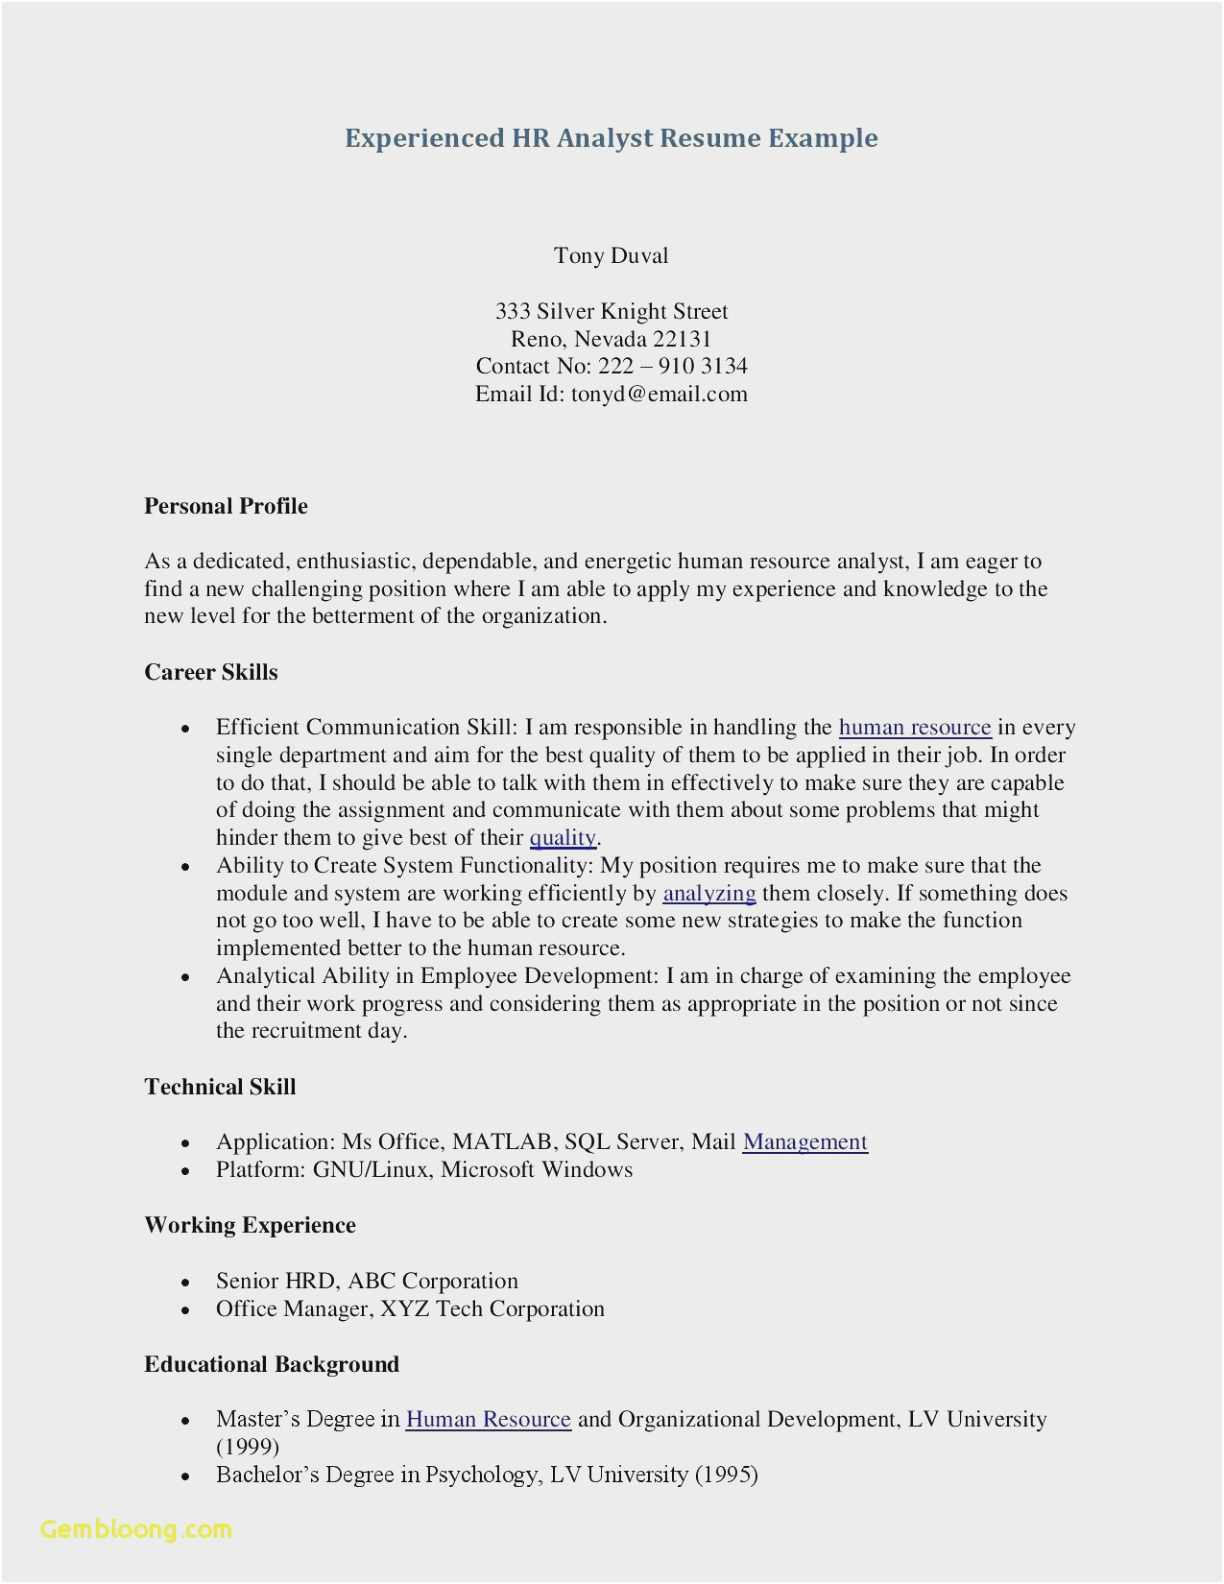 Email Sample to Recruiter with Resume Free Download 59 Recruiter Resume Examples